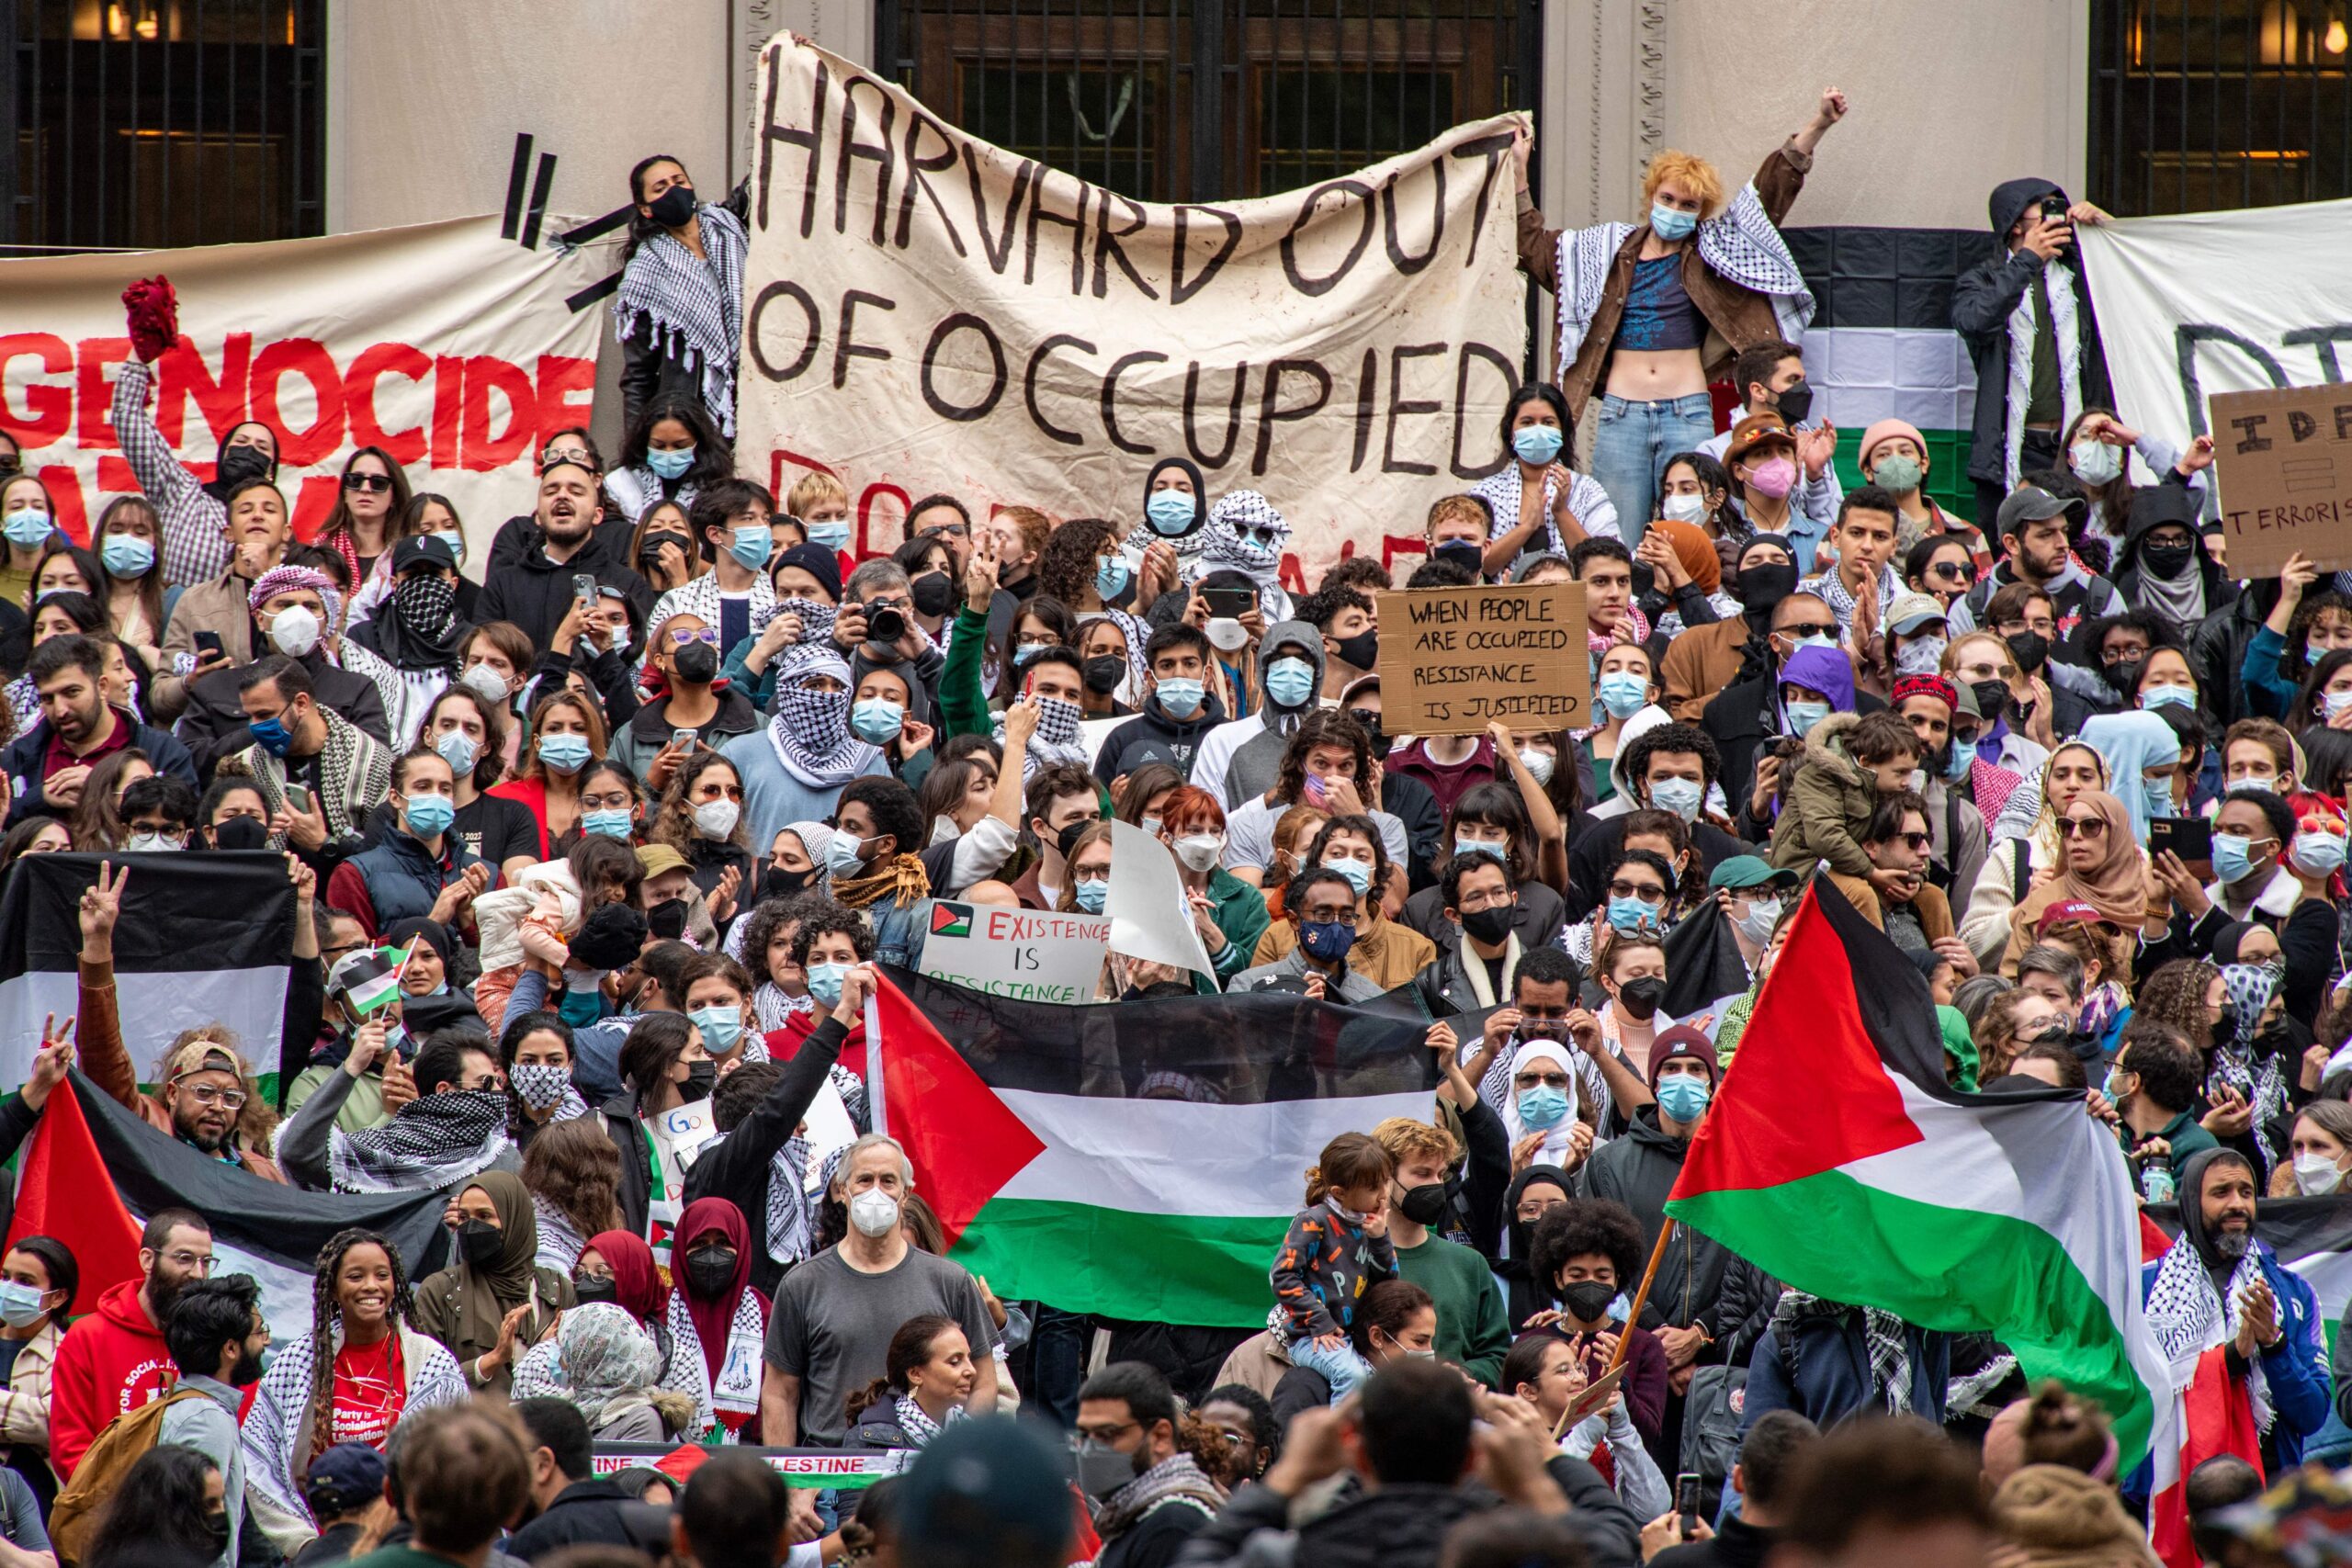 Harvard Law students step down from student government following secret ballot vote against Israel